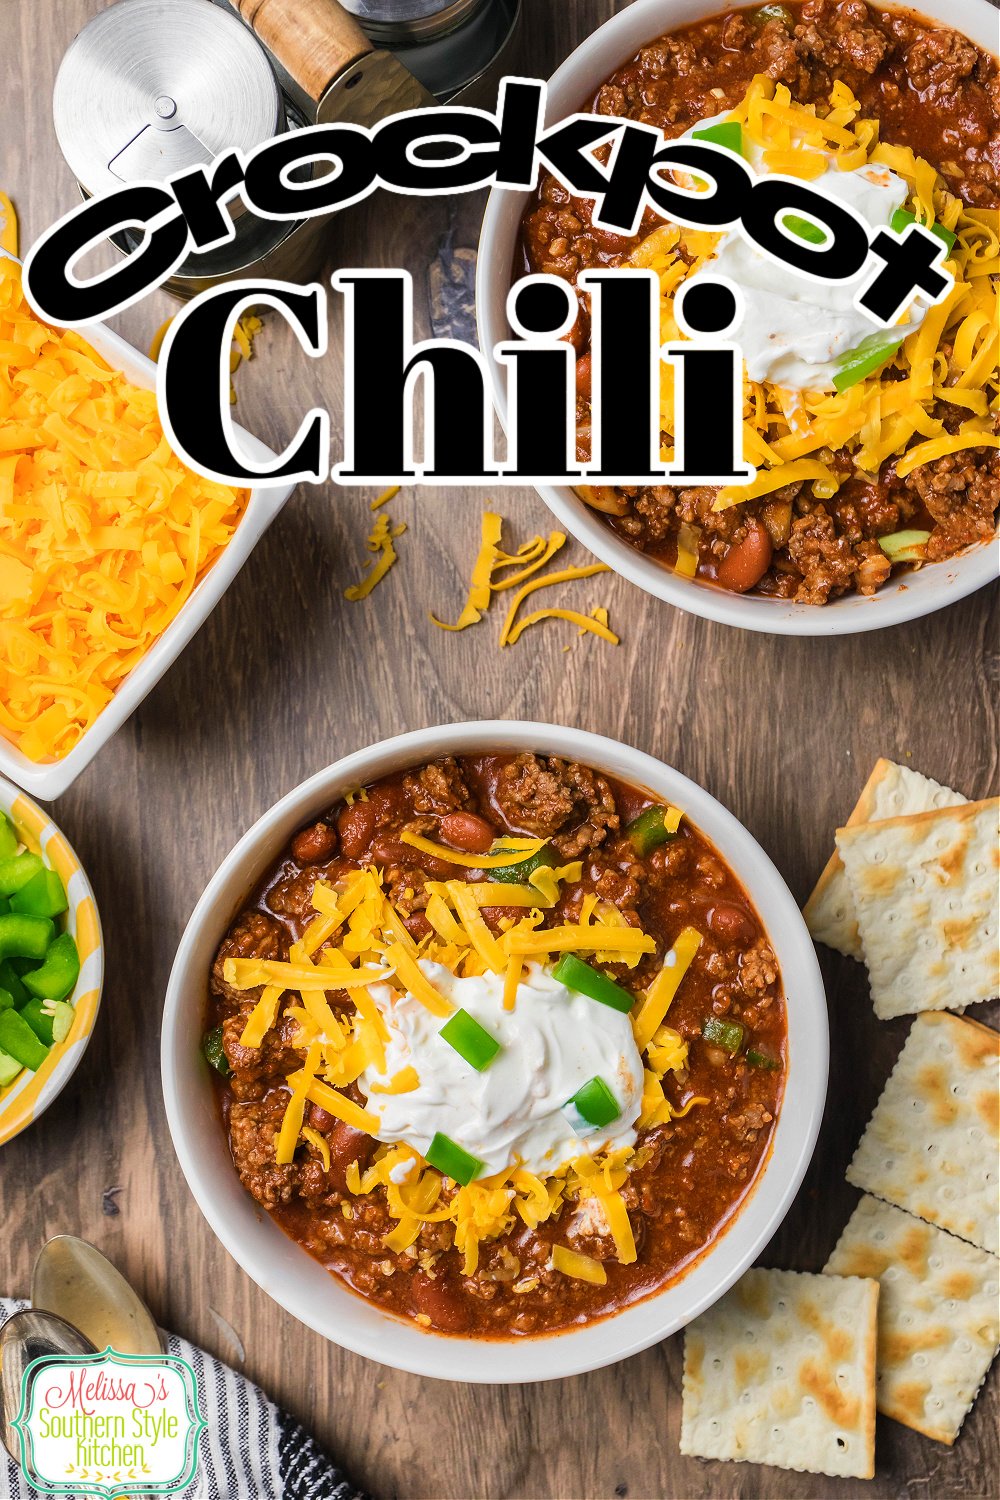 You can feast on a big bowl of this Crockpot Chili Recipe any night of the week or simmer it low and slow for game day grazing. #chili #chilirecipes #crockpotchili #slowcookerchili #easygroundbeefrecipes #beefchili #chiliwithbeans via @melissasssk